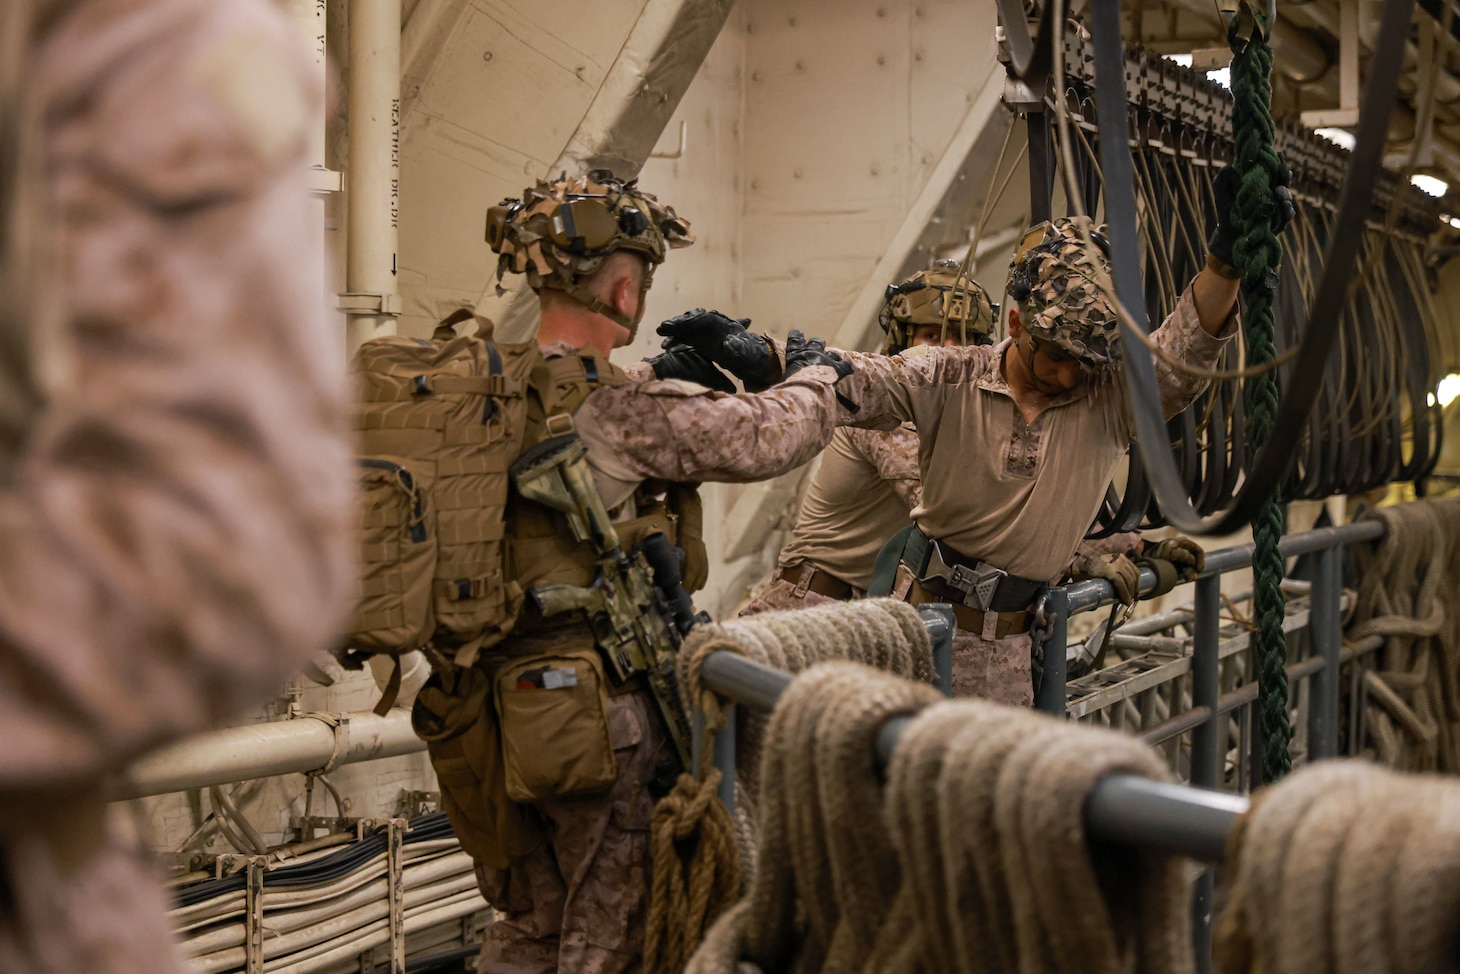 U.S. Marine Corps Cpl. Khuaja Shams, right, a fast-rope master assigned to Charlie Company, Battalion Landing Team 1/5, 15th Marine Expeditionary Unit, belays a Marine during fast-rope training aboard the amphibious transport dock USS Somerset (LPD 25) during Exercise Tiger TRIUMPH in Visakhapatnam, India, March 20, 2024. Tiger TRIUMPH is a U.S.-India tri-service amphibious exercise focused on humanitarian assistance and disaster relief readiness and interoperability. Tiger TRIUMPH enables U.S. and Indian Armed Forces to improve interoperability and bilateral, joint, and service readiness in the Indian Ocean region and beyond to better achieve mutual regional security objectives. (U.S. Marine Corps photo by Cpl. Aidan Hekker)